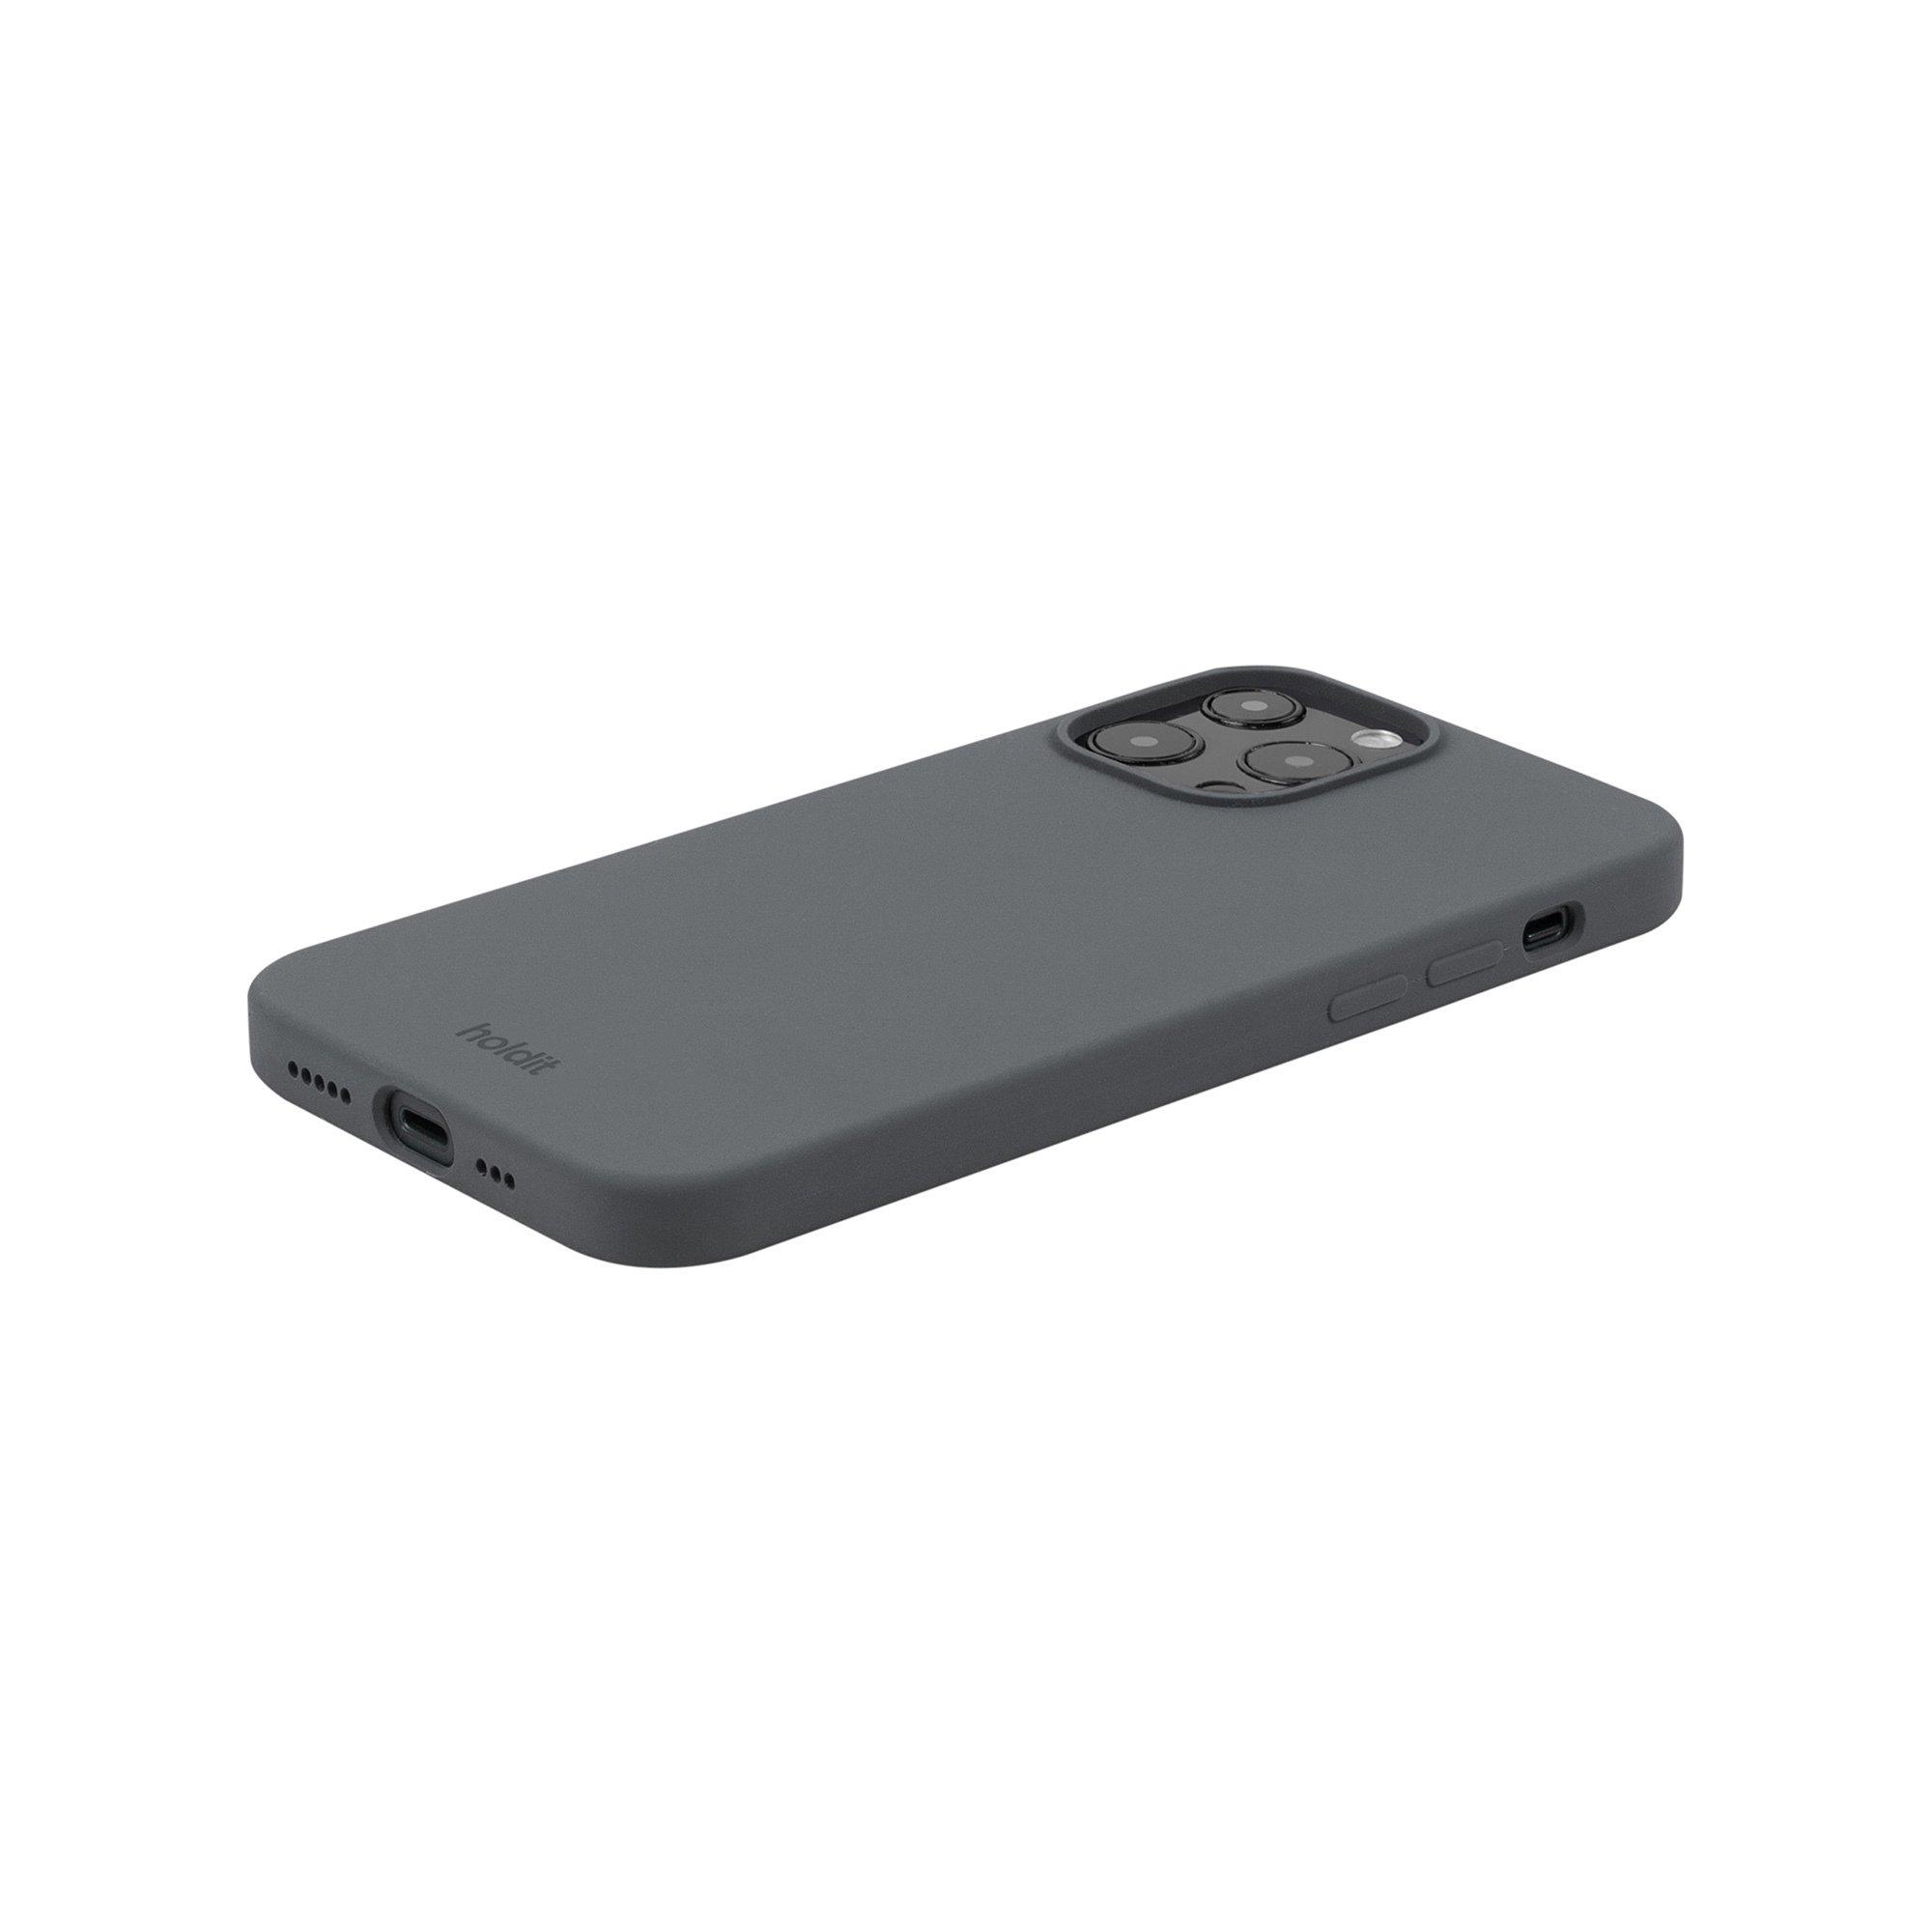 Holdit iPhone 13 Pro Max AirPods Case 